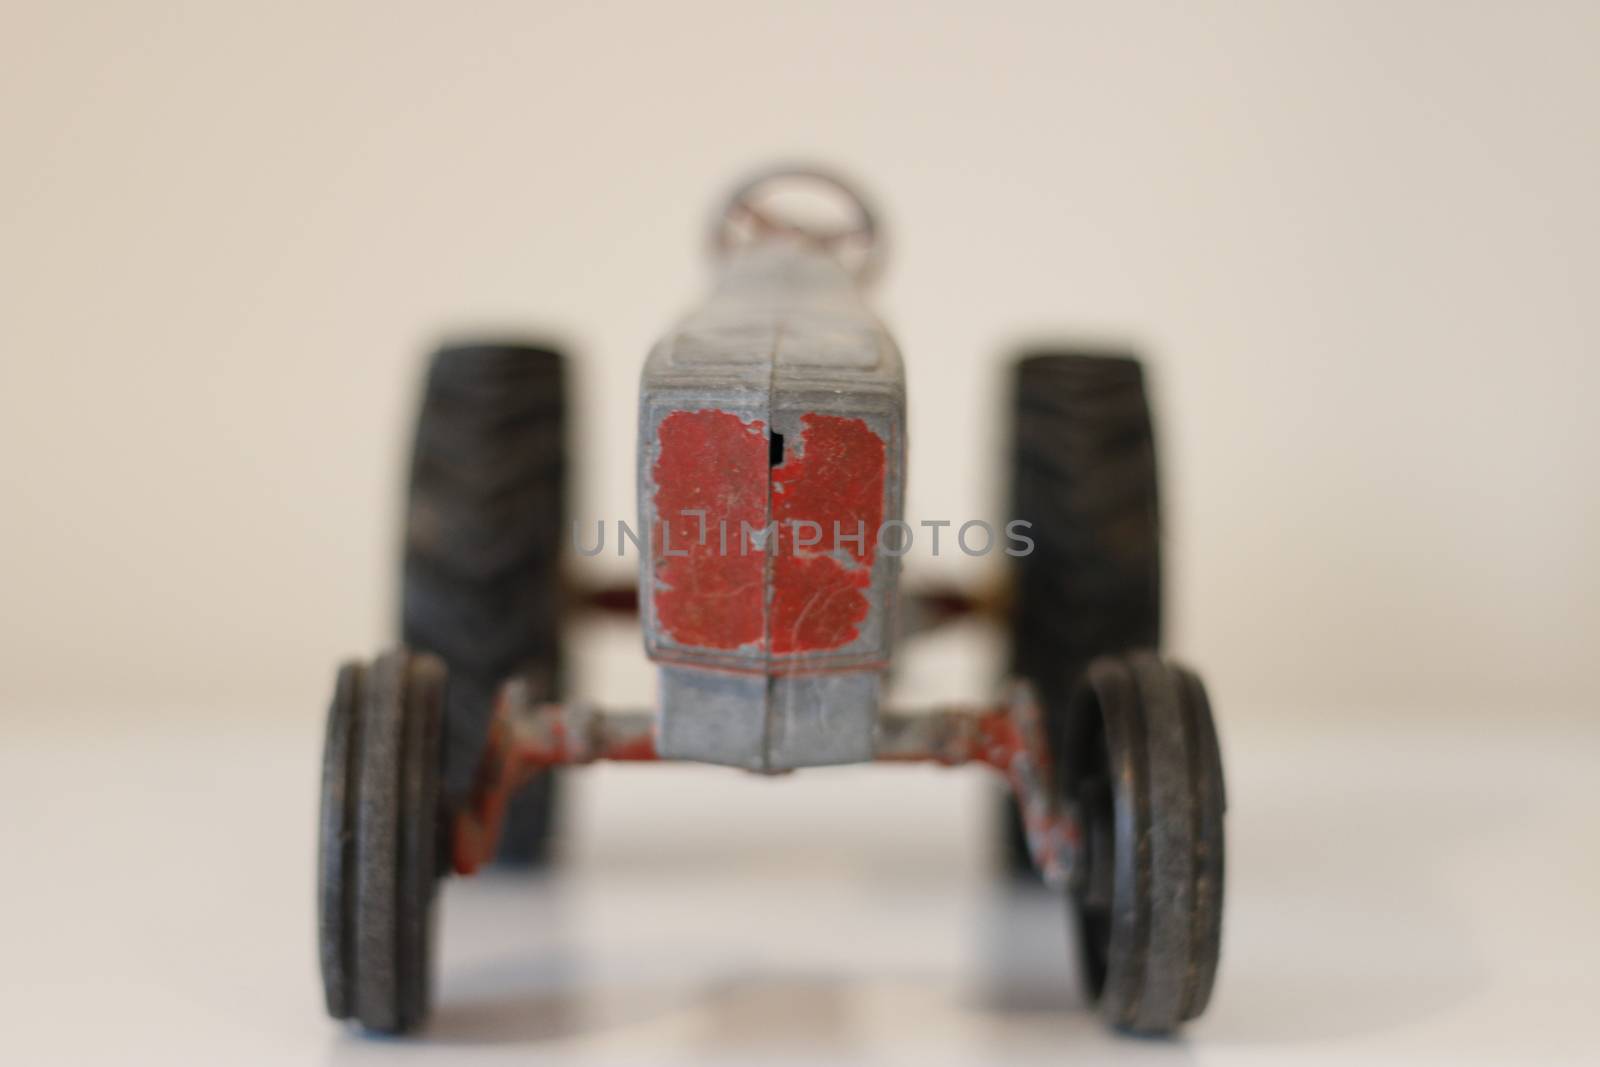 Scale model of traditional Farm Tractor by mynewturtle1